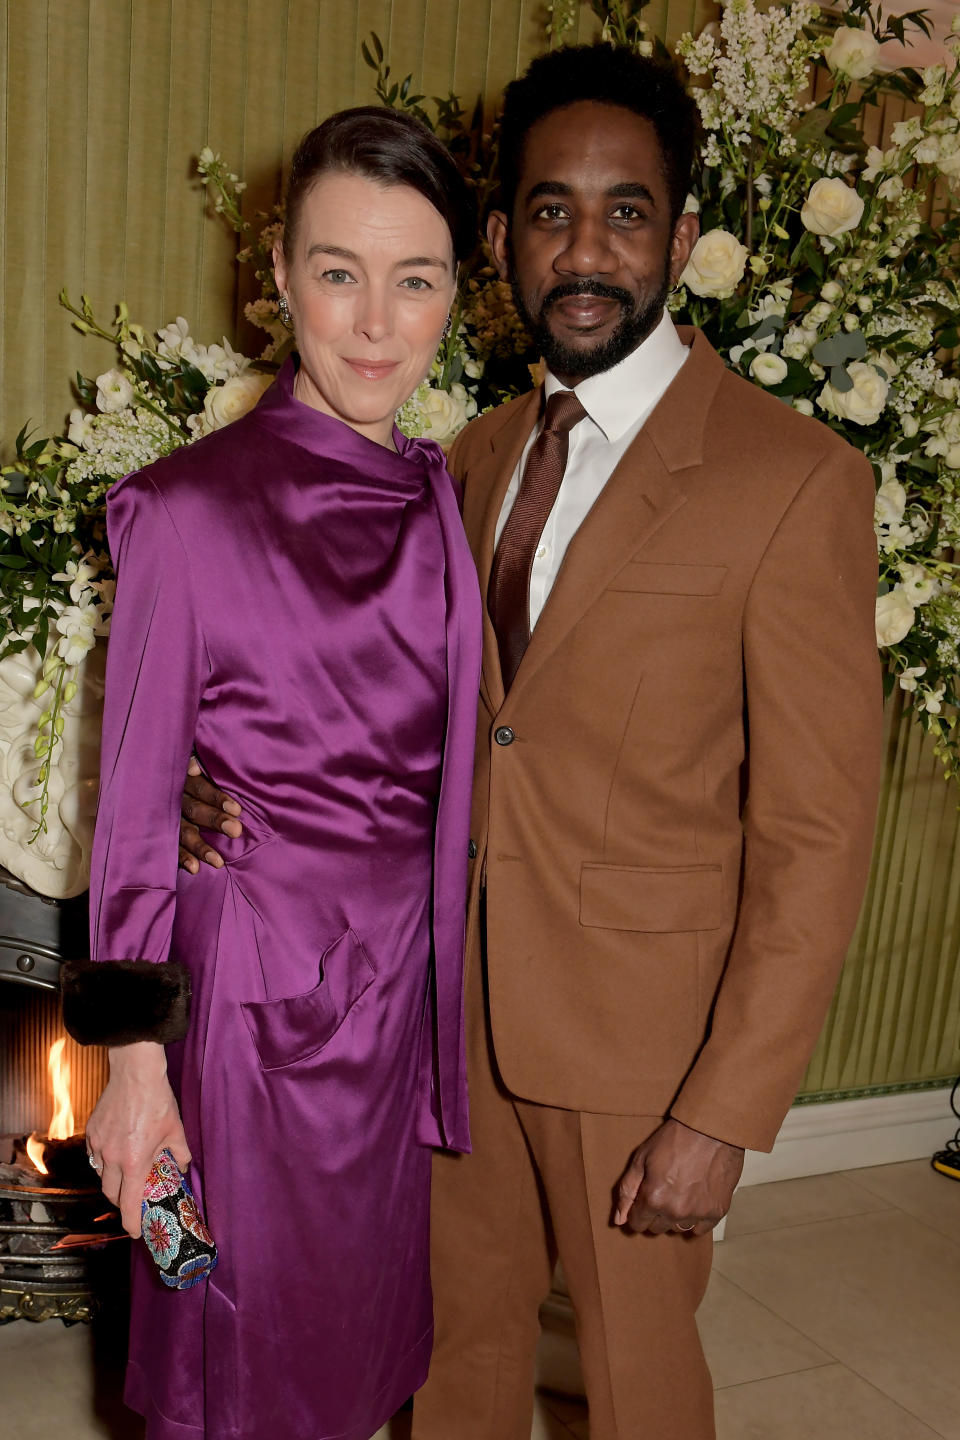 LONDON, ENGLAND - FEBRUARY 02:  Olivia Williams and Rhashan Stone attend the British Vogue and Tiffany & Co. Fashion and Film Party at Annabel's on February 2, 2020 in London, England. (Photo by David M. Benett/Dave Benett/Getty Images)